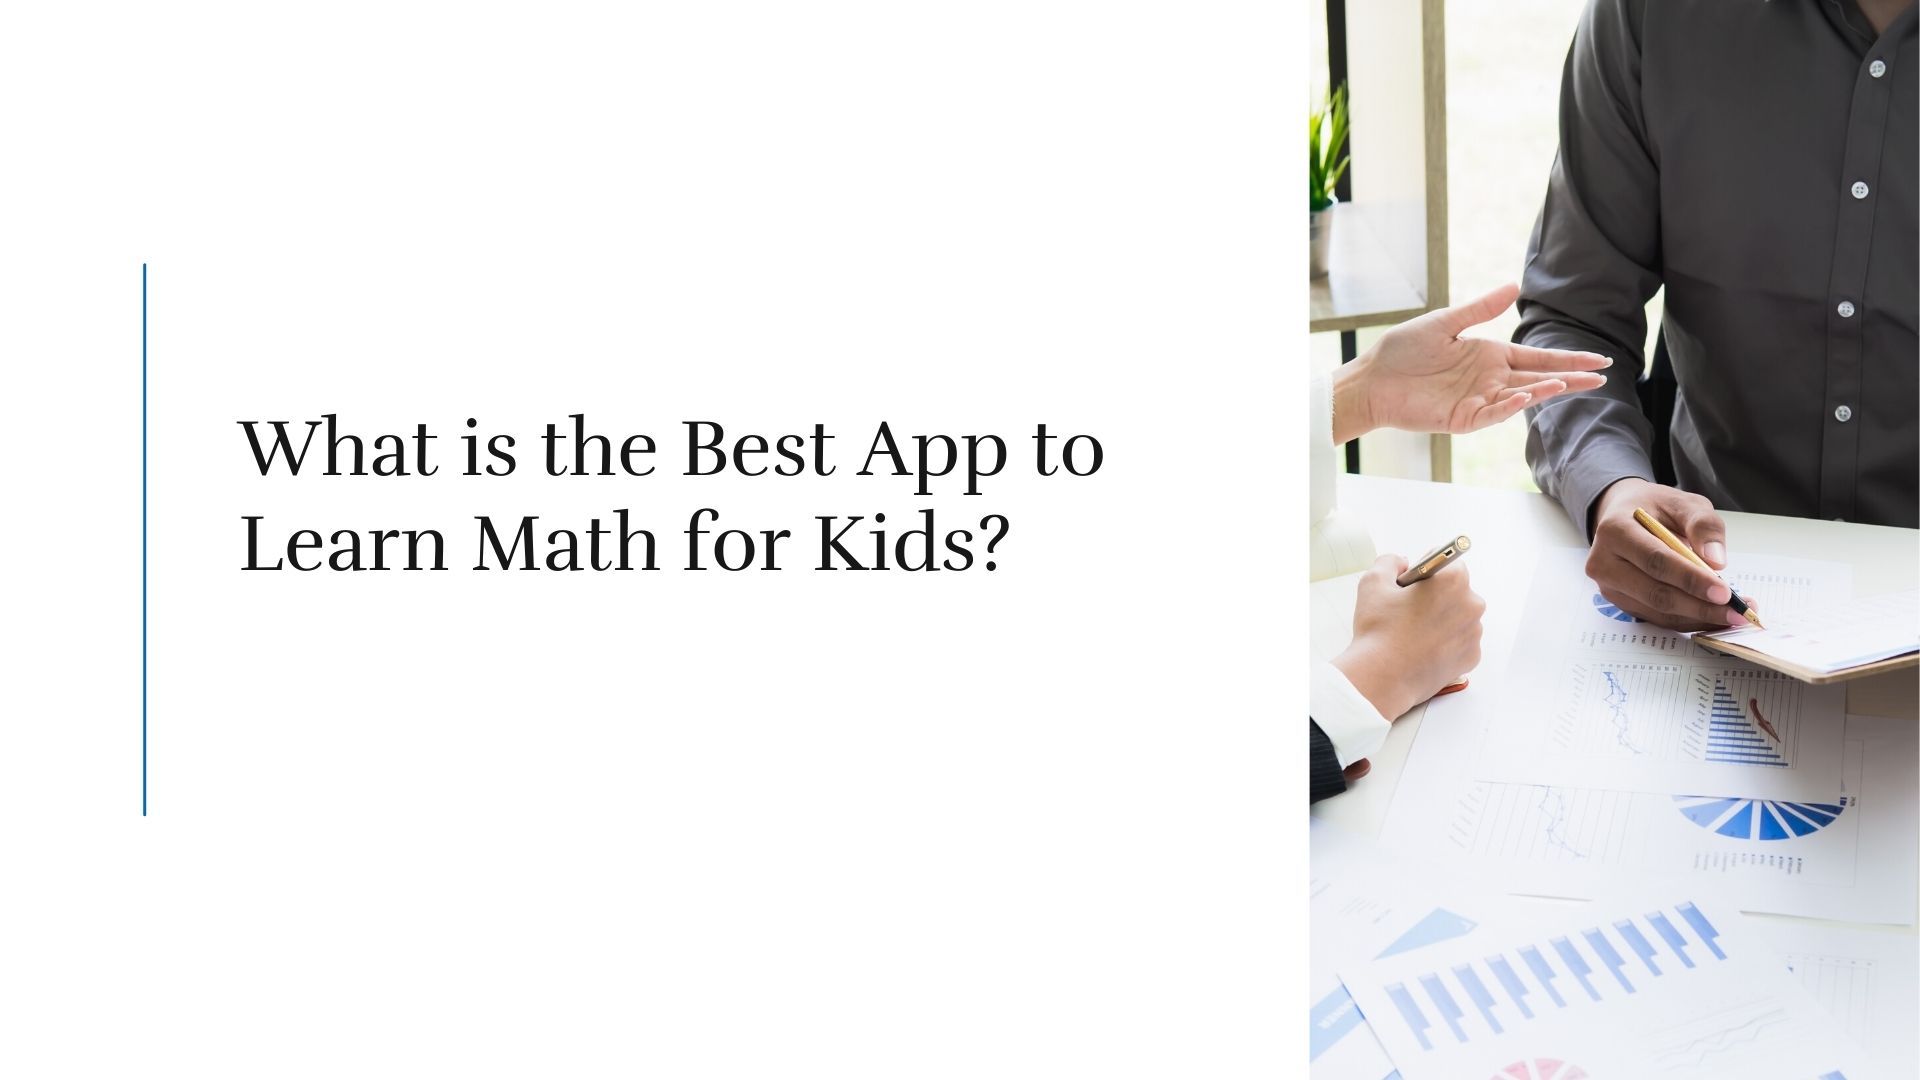 What is the Best App to Learn Math for Kids?